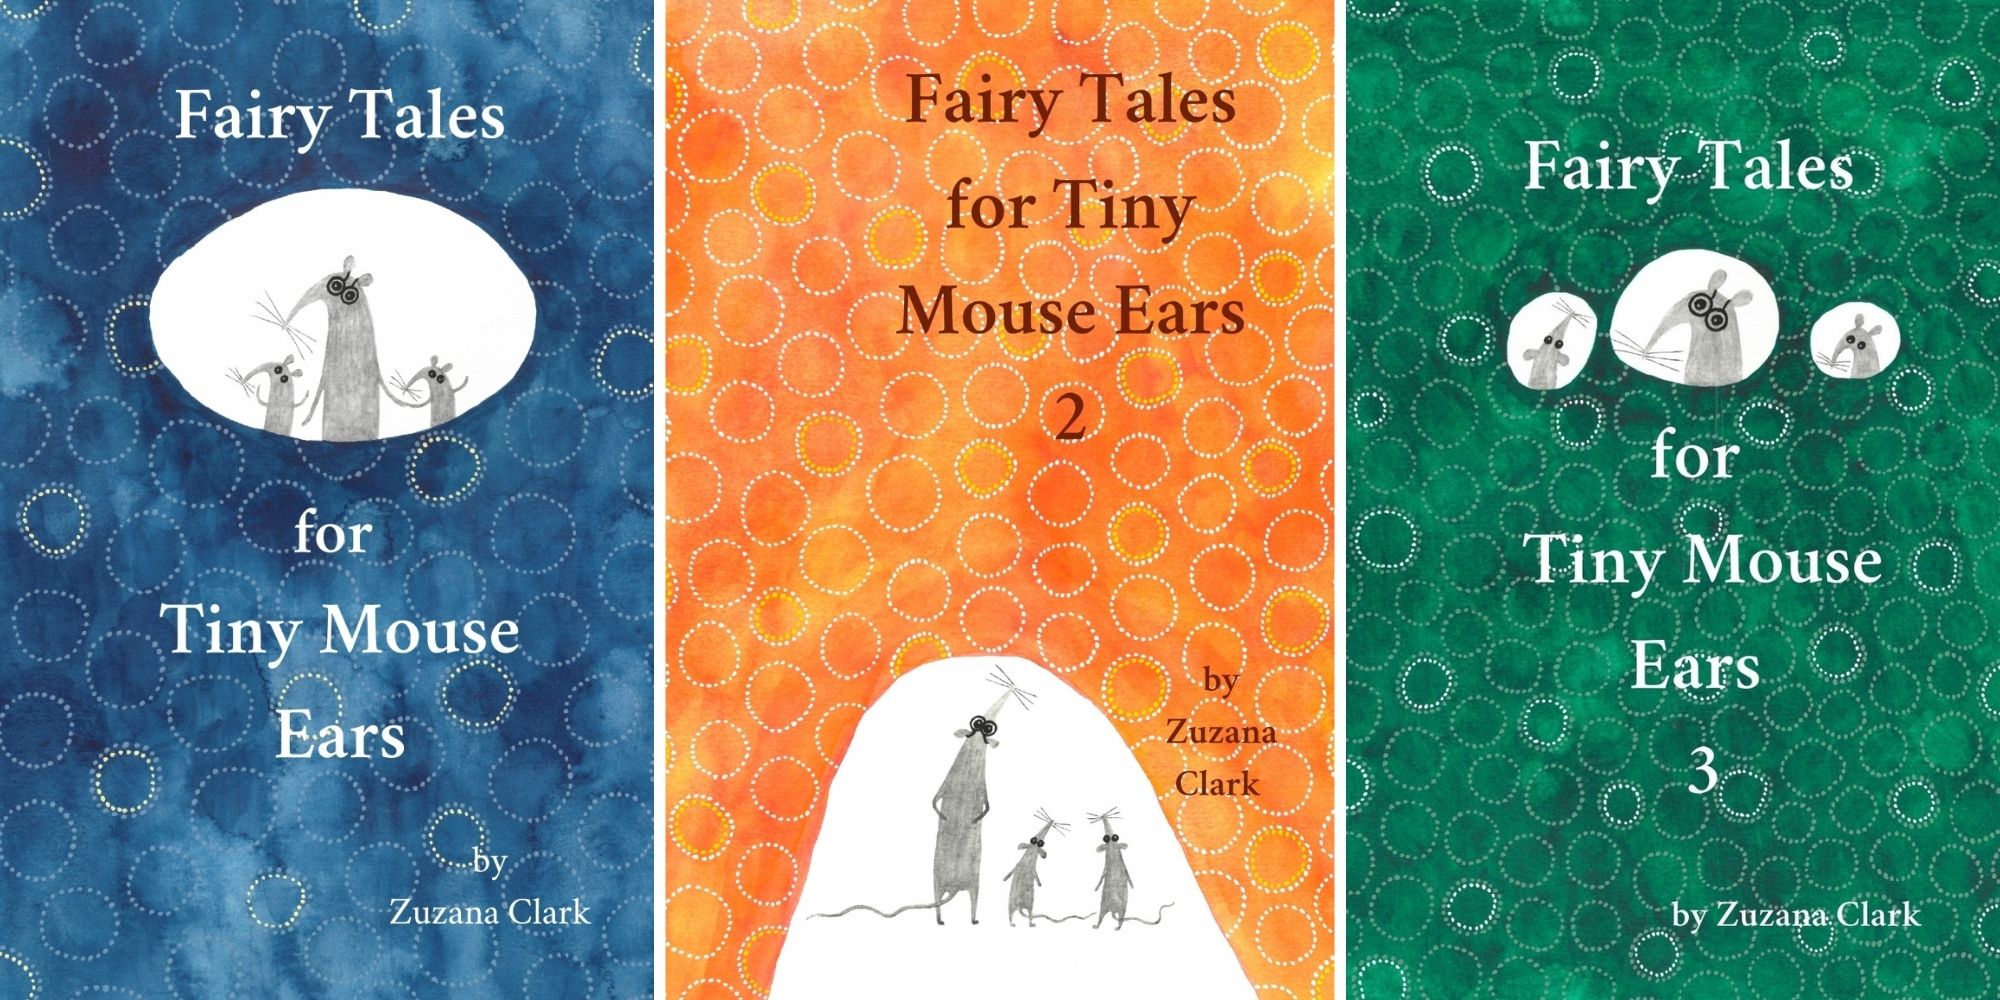 Fairy Tales for Tiny Mouse Ears